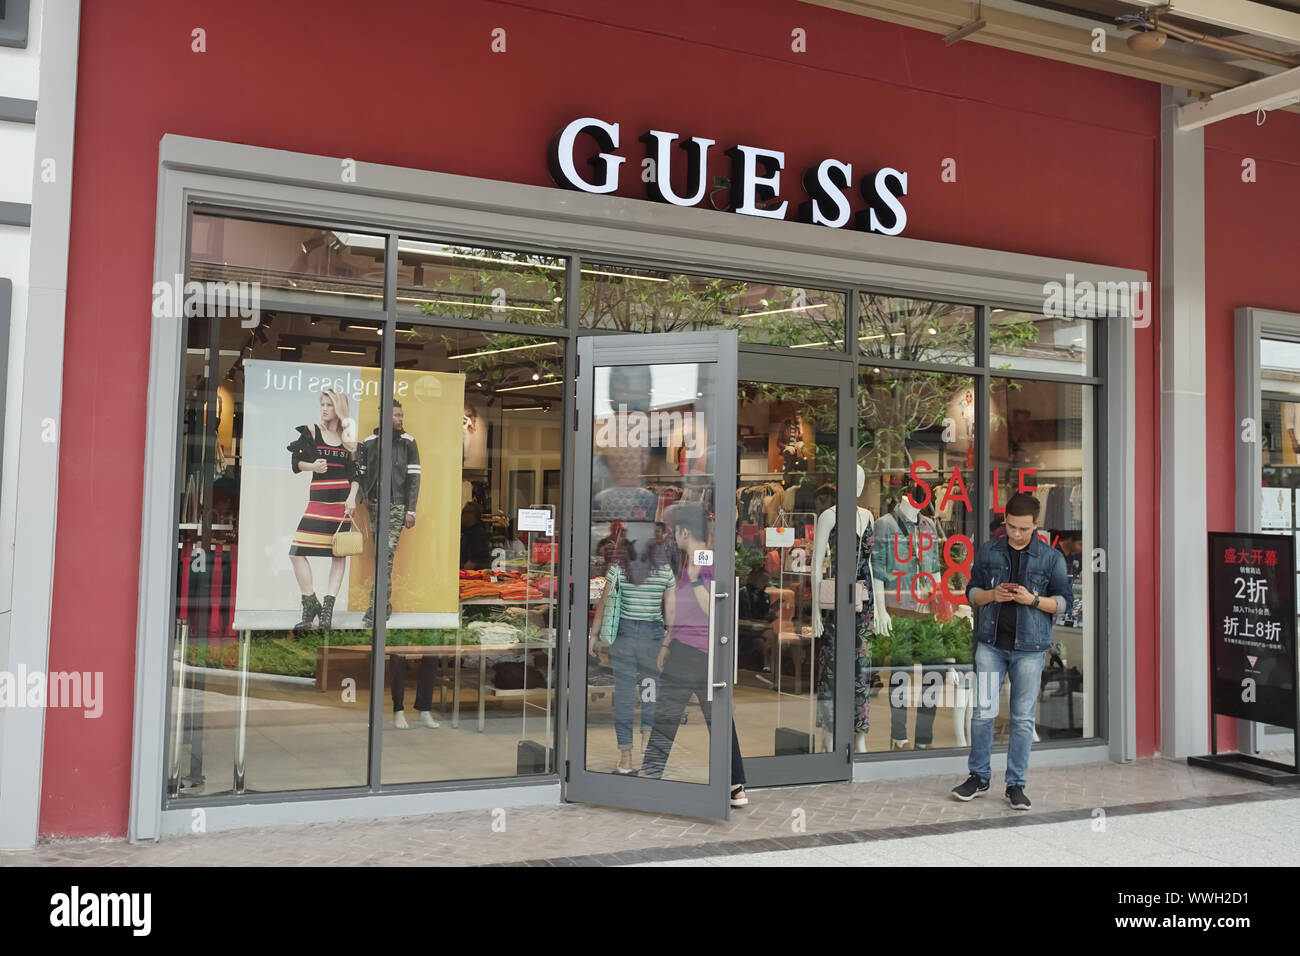 Guess Store High Resolution Stock Photography and Images - Alamy